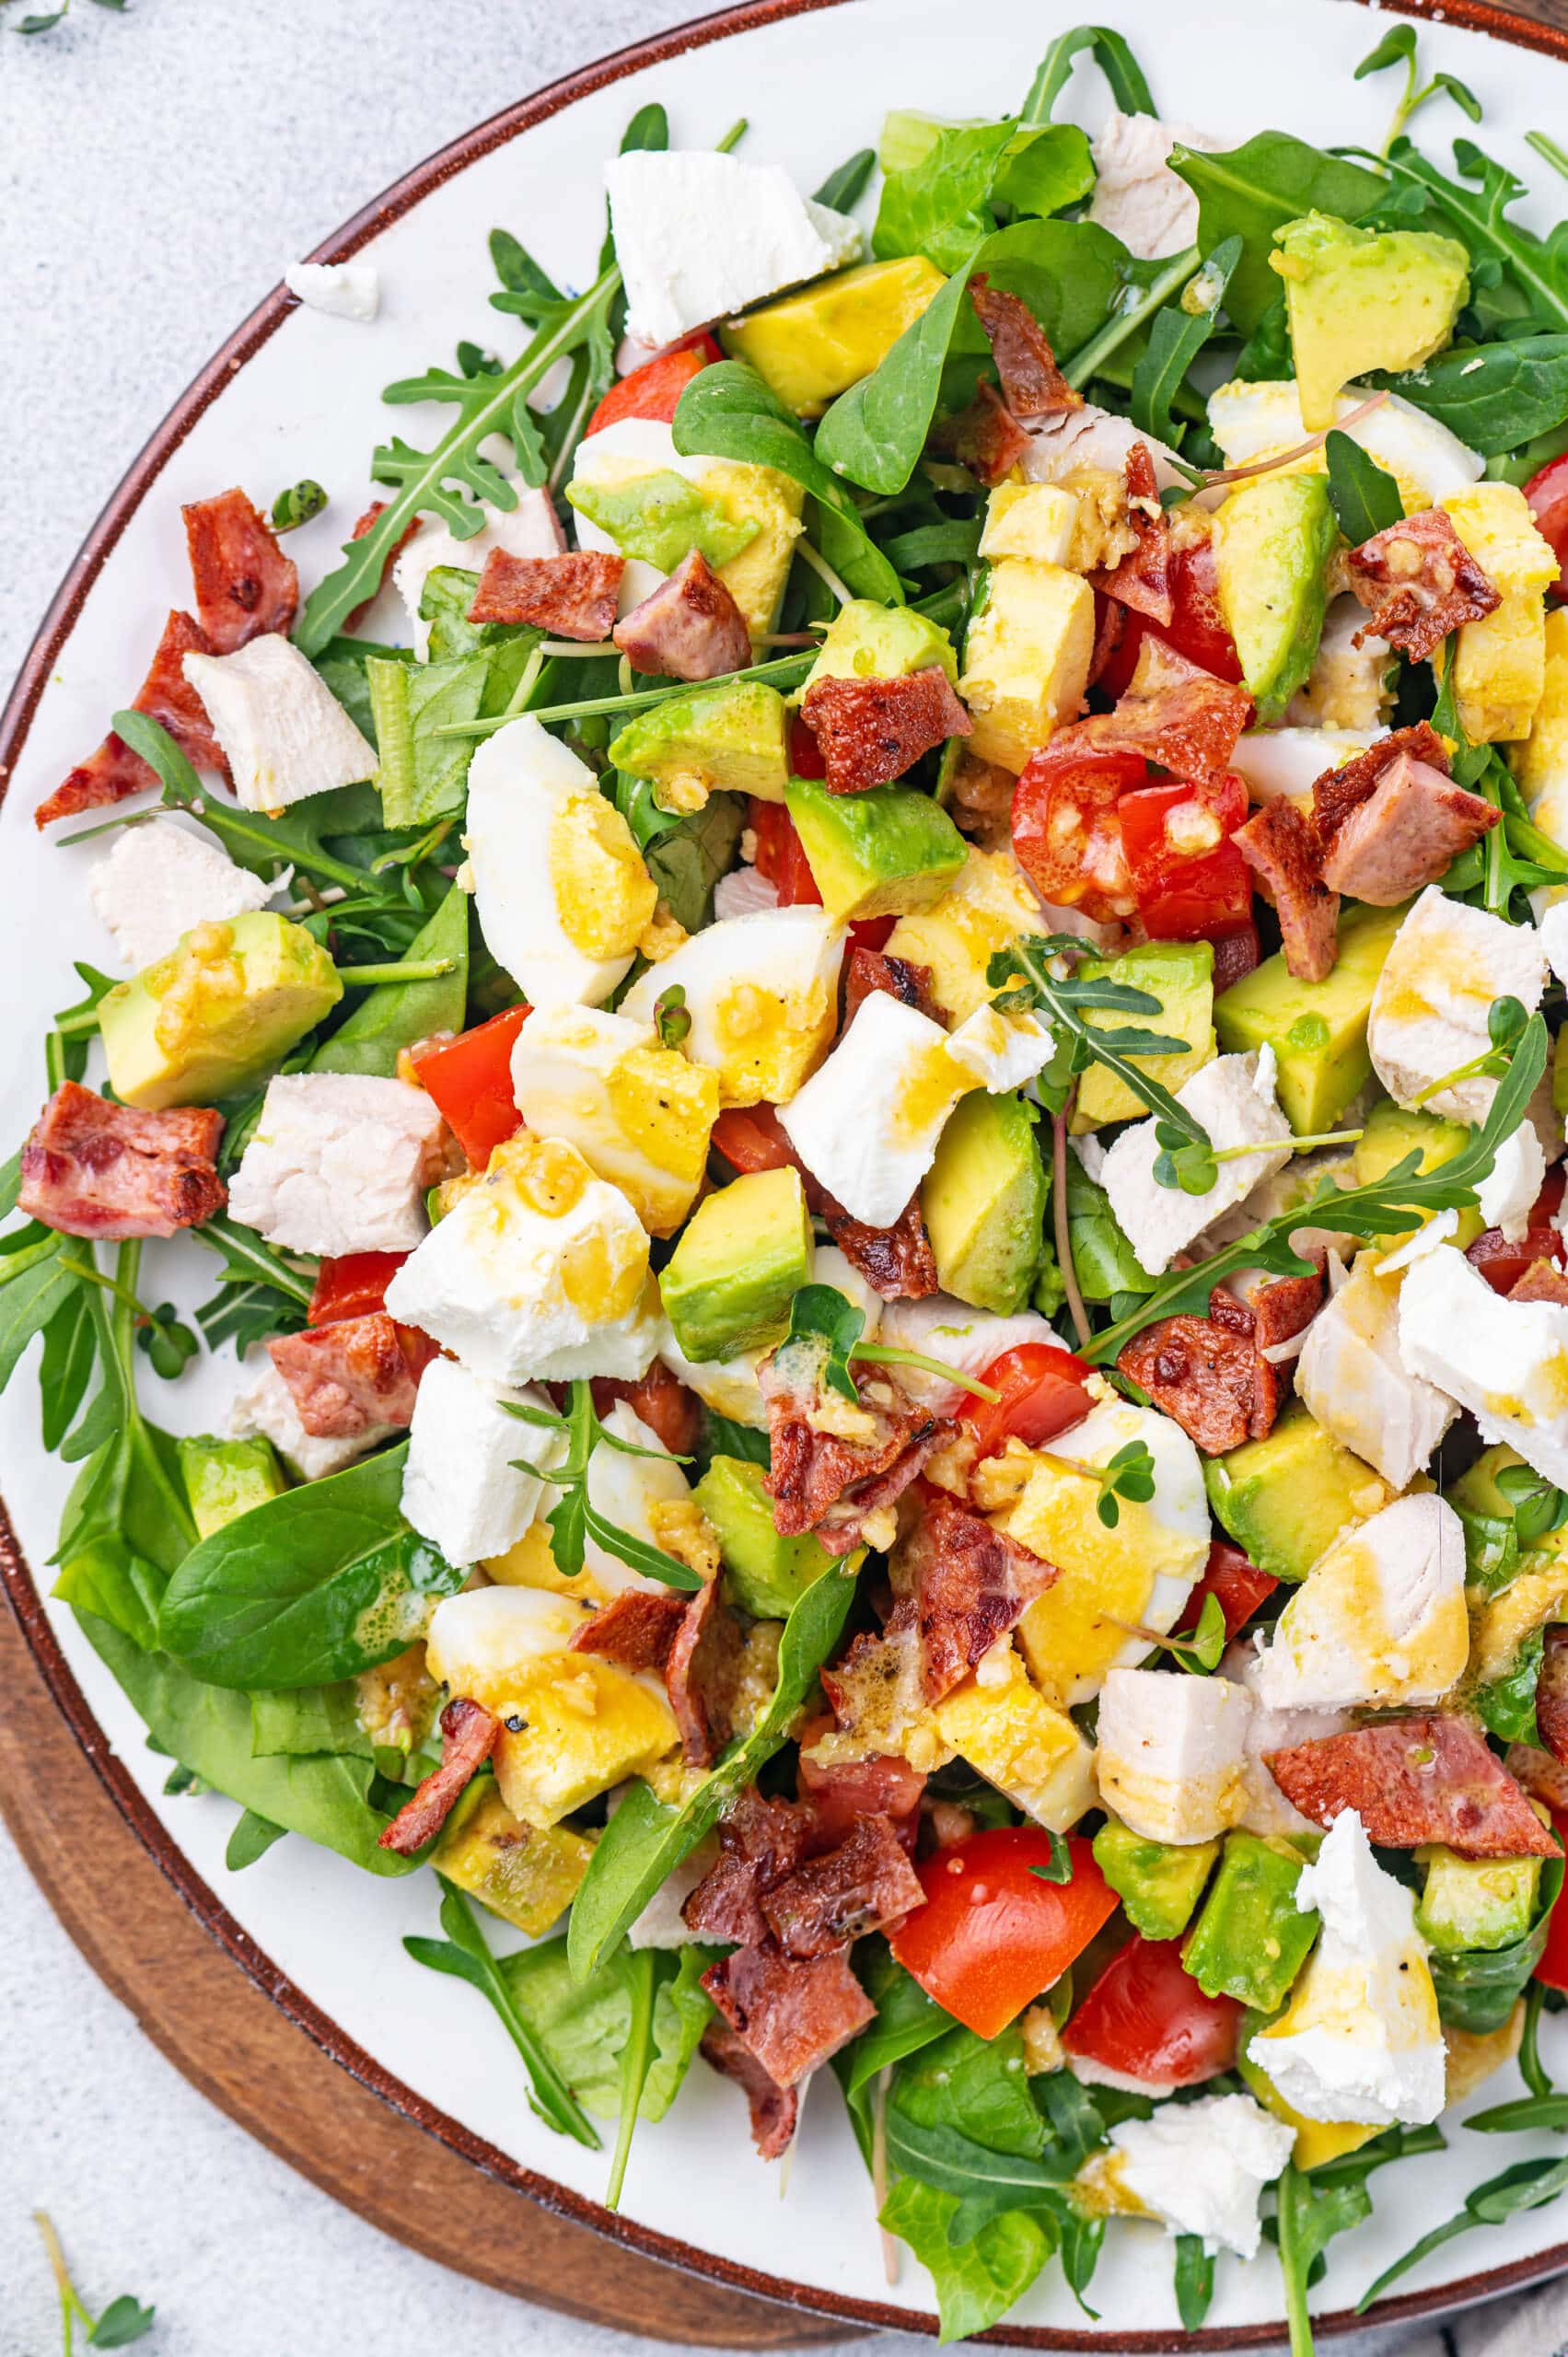 Healthy Cobb Salad with The Best Vinaigrette (Gluten-Free and Nut-Free)